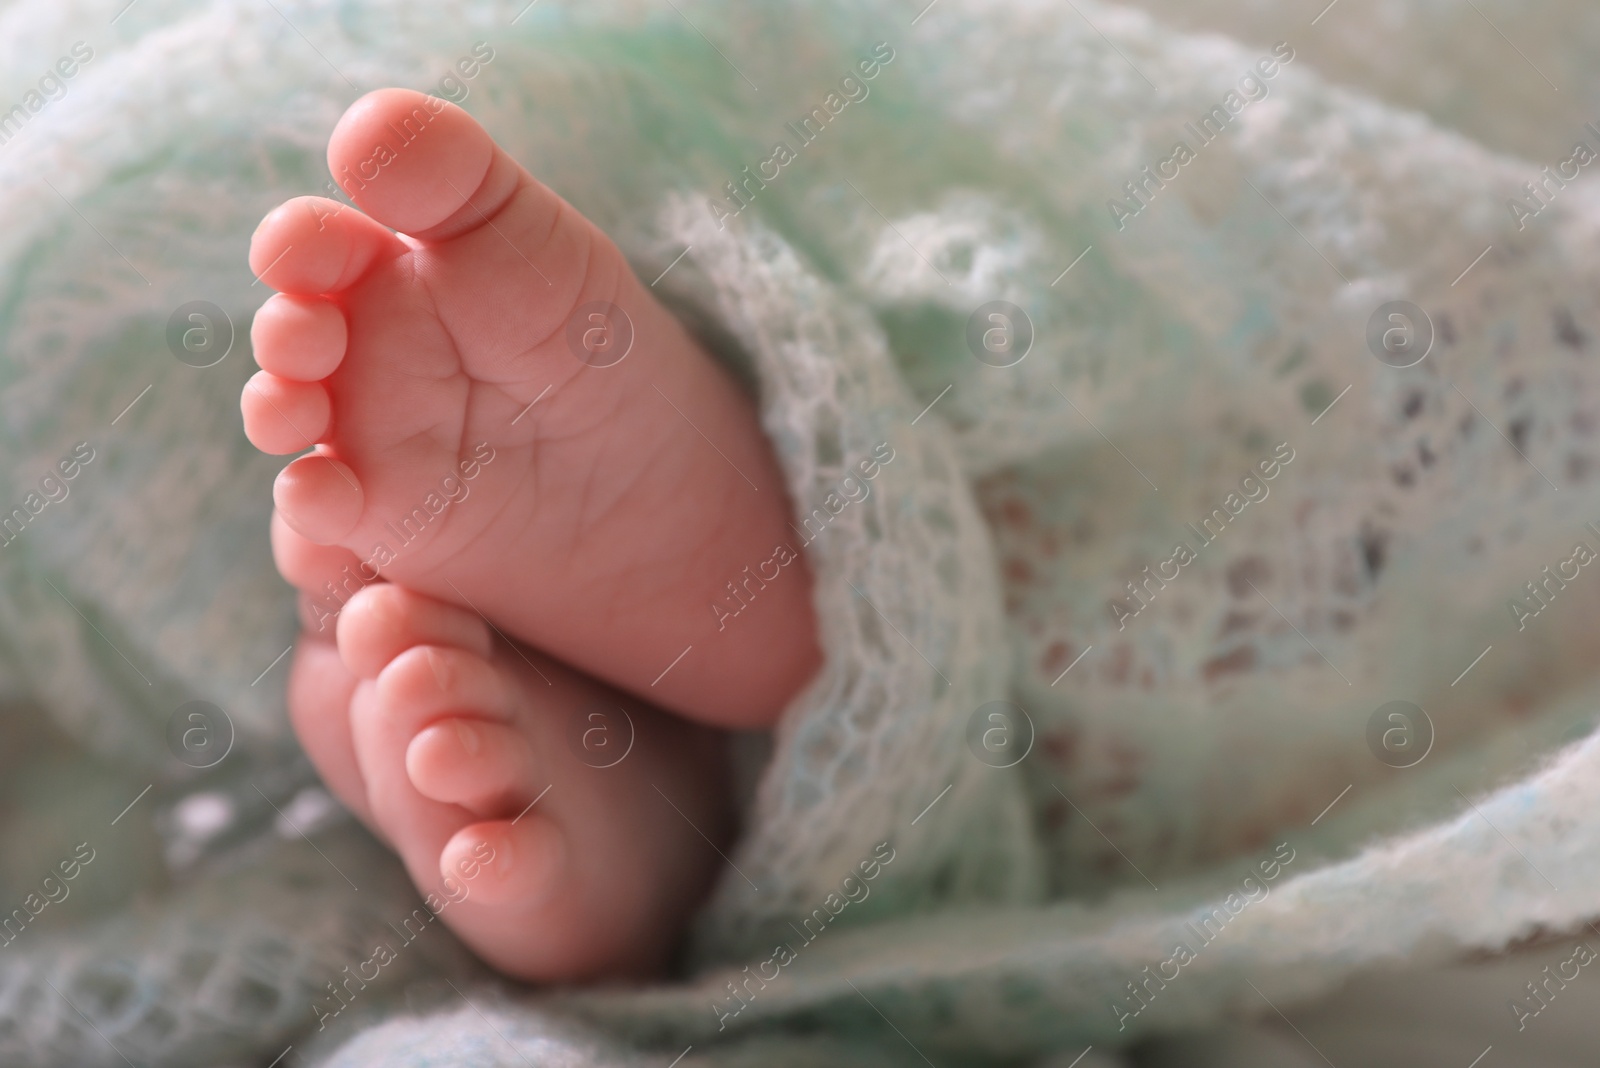 Photo of Cute newborn baby covered in turquoise crocheted plaid on bed, closeup of legs